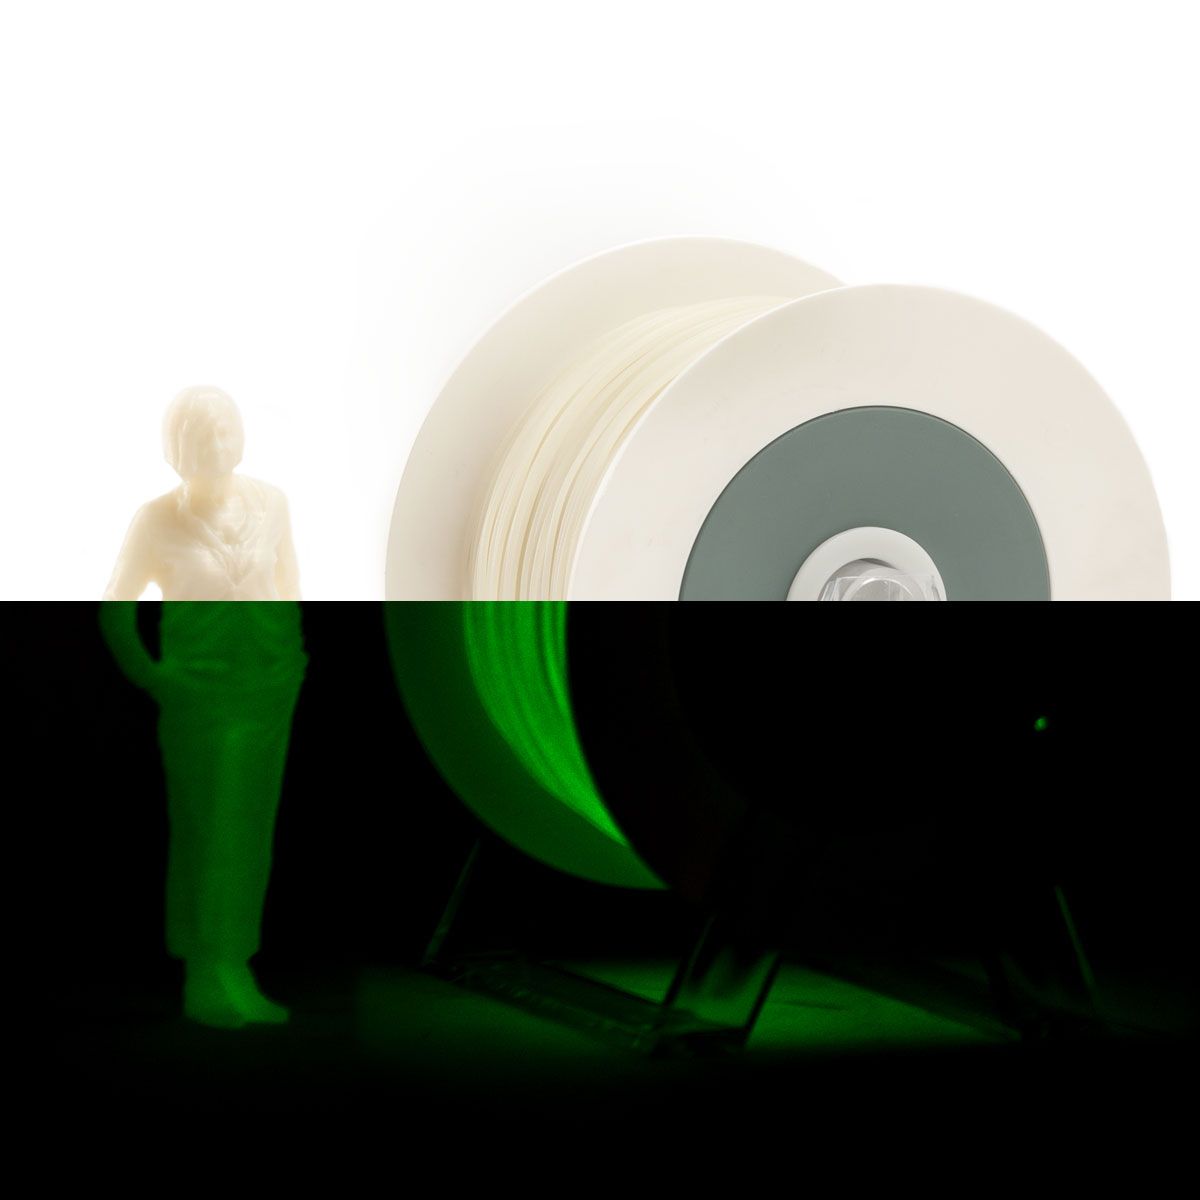 PLA Filament | Color: Photoluminescent Ivory White / Green Extra Power